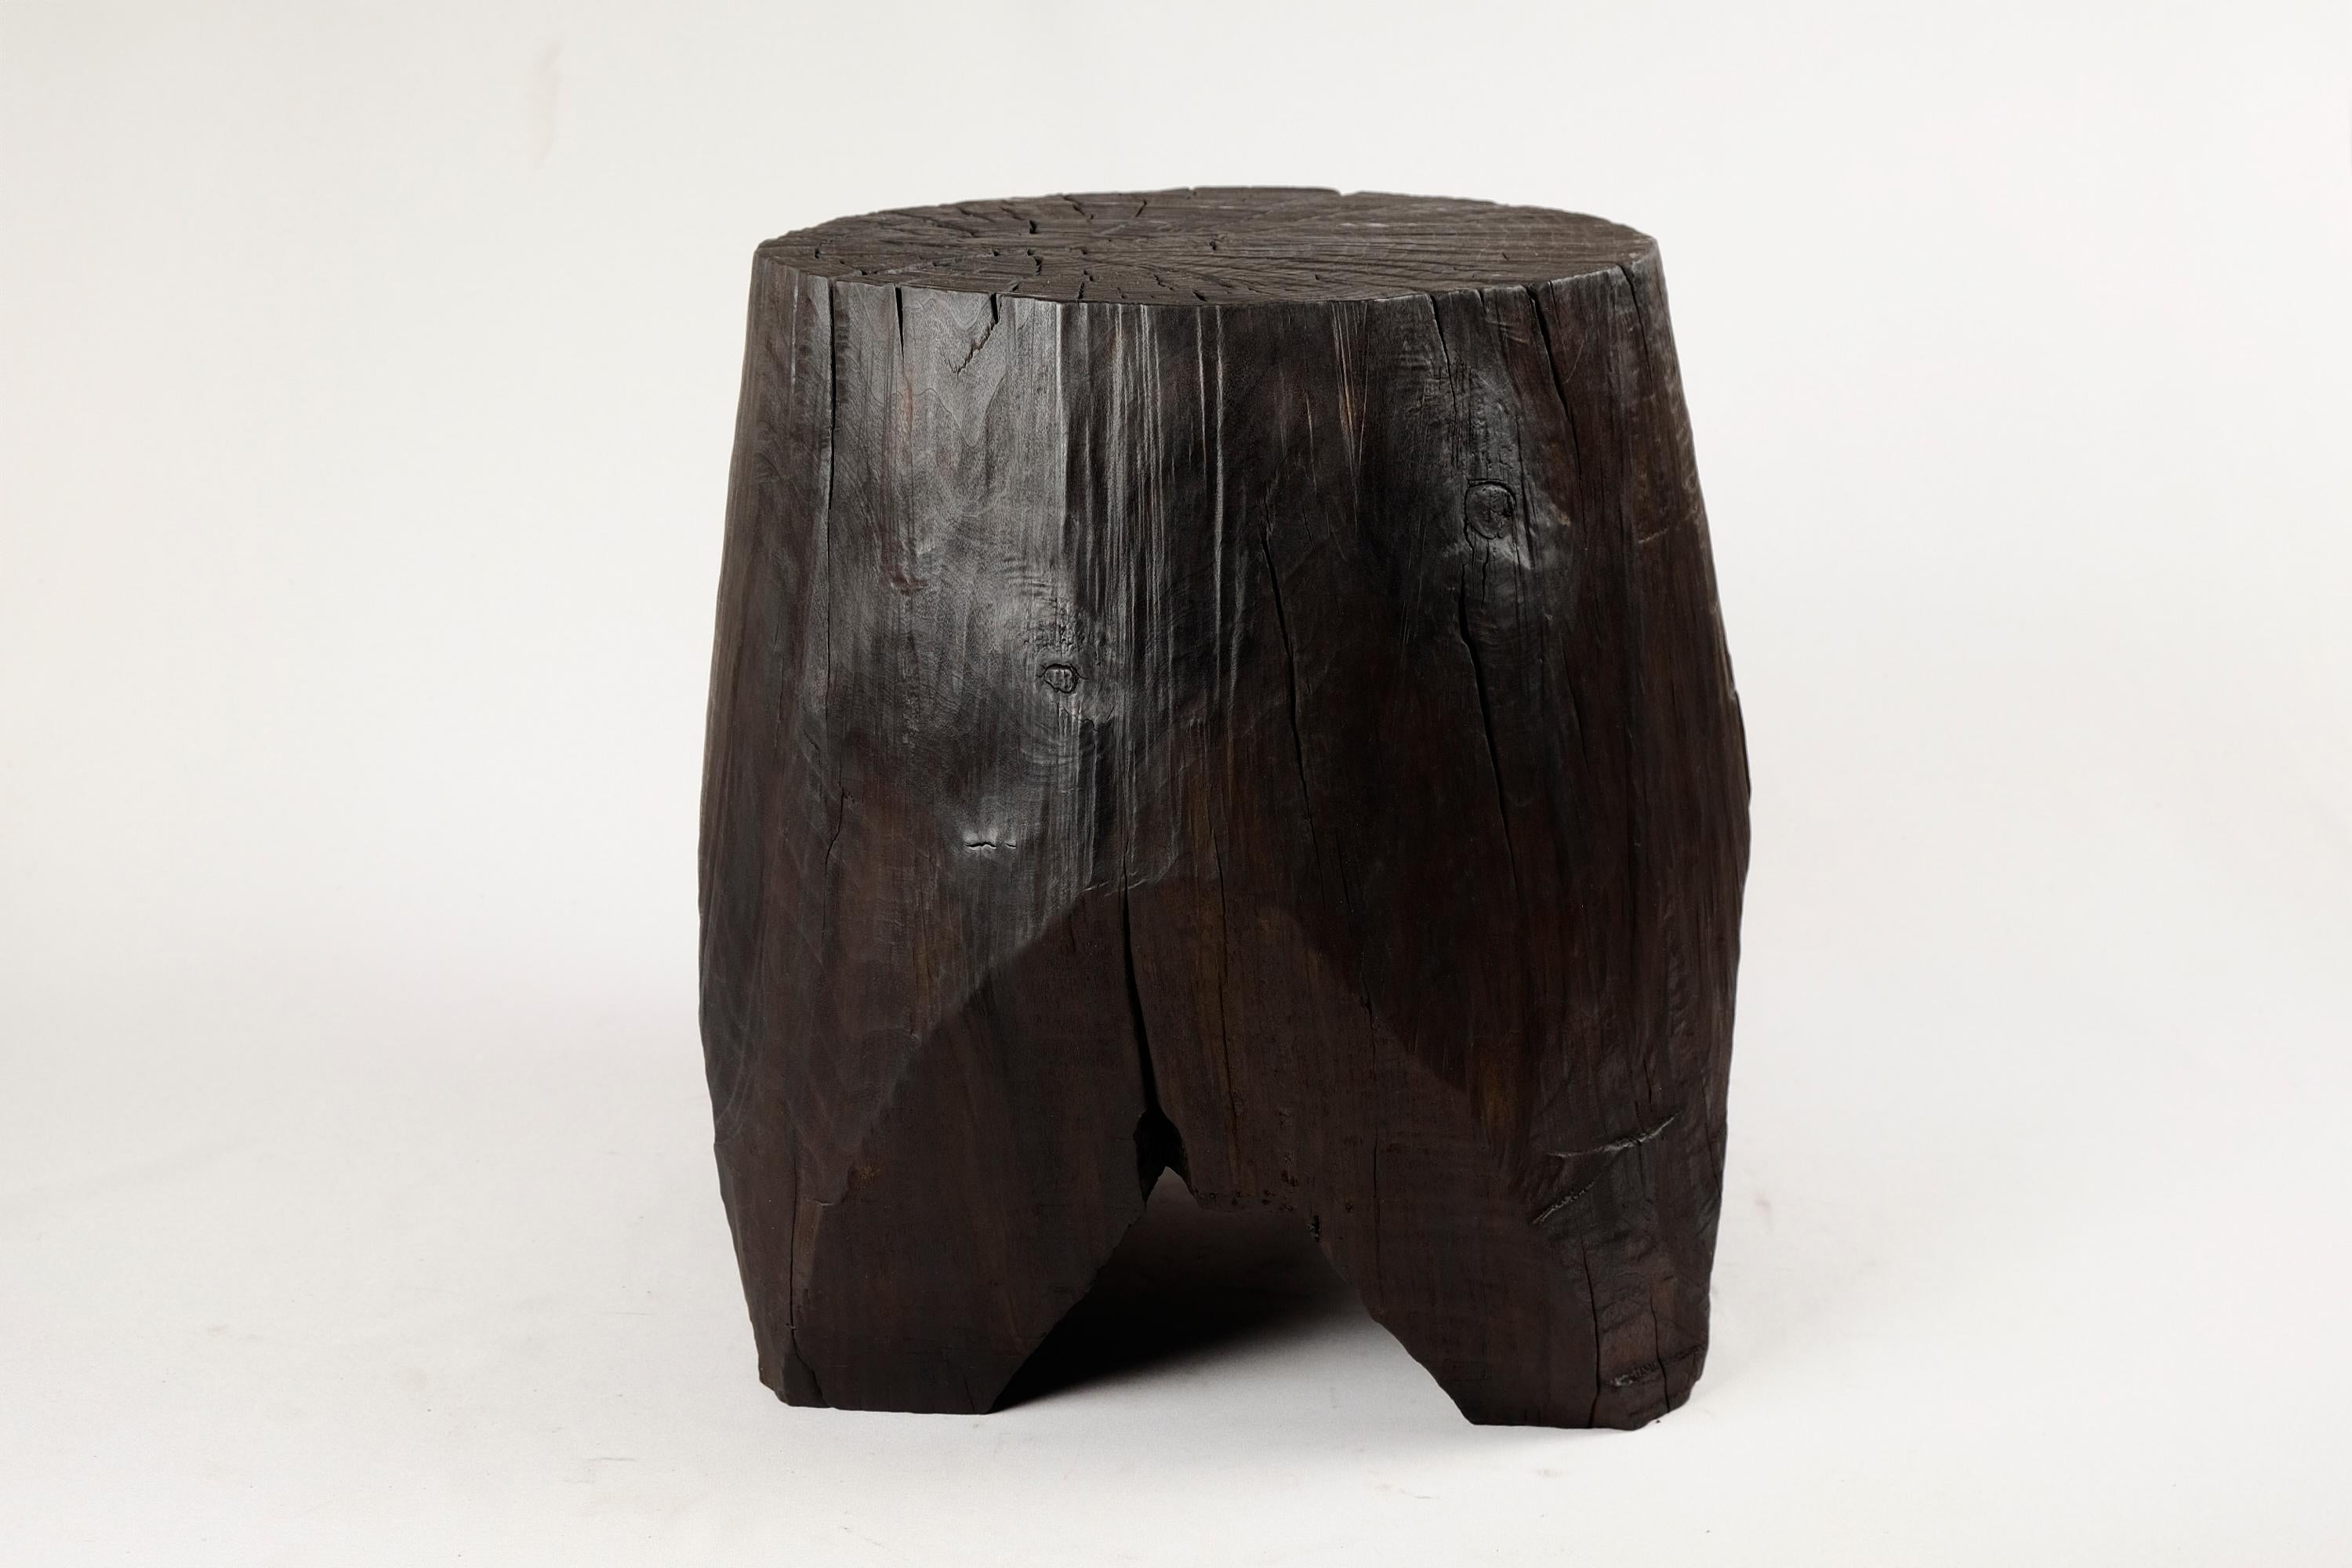 Unique chainsaw carved wooden contemporary rustic side table. Carved from a single piece of wood and protected with the highest quality oils, ensuring durability for generations. Such unique handmade design will highlight your interior and bring